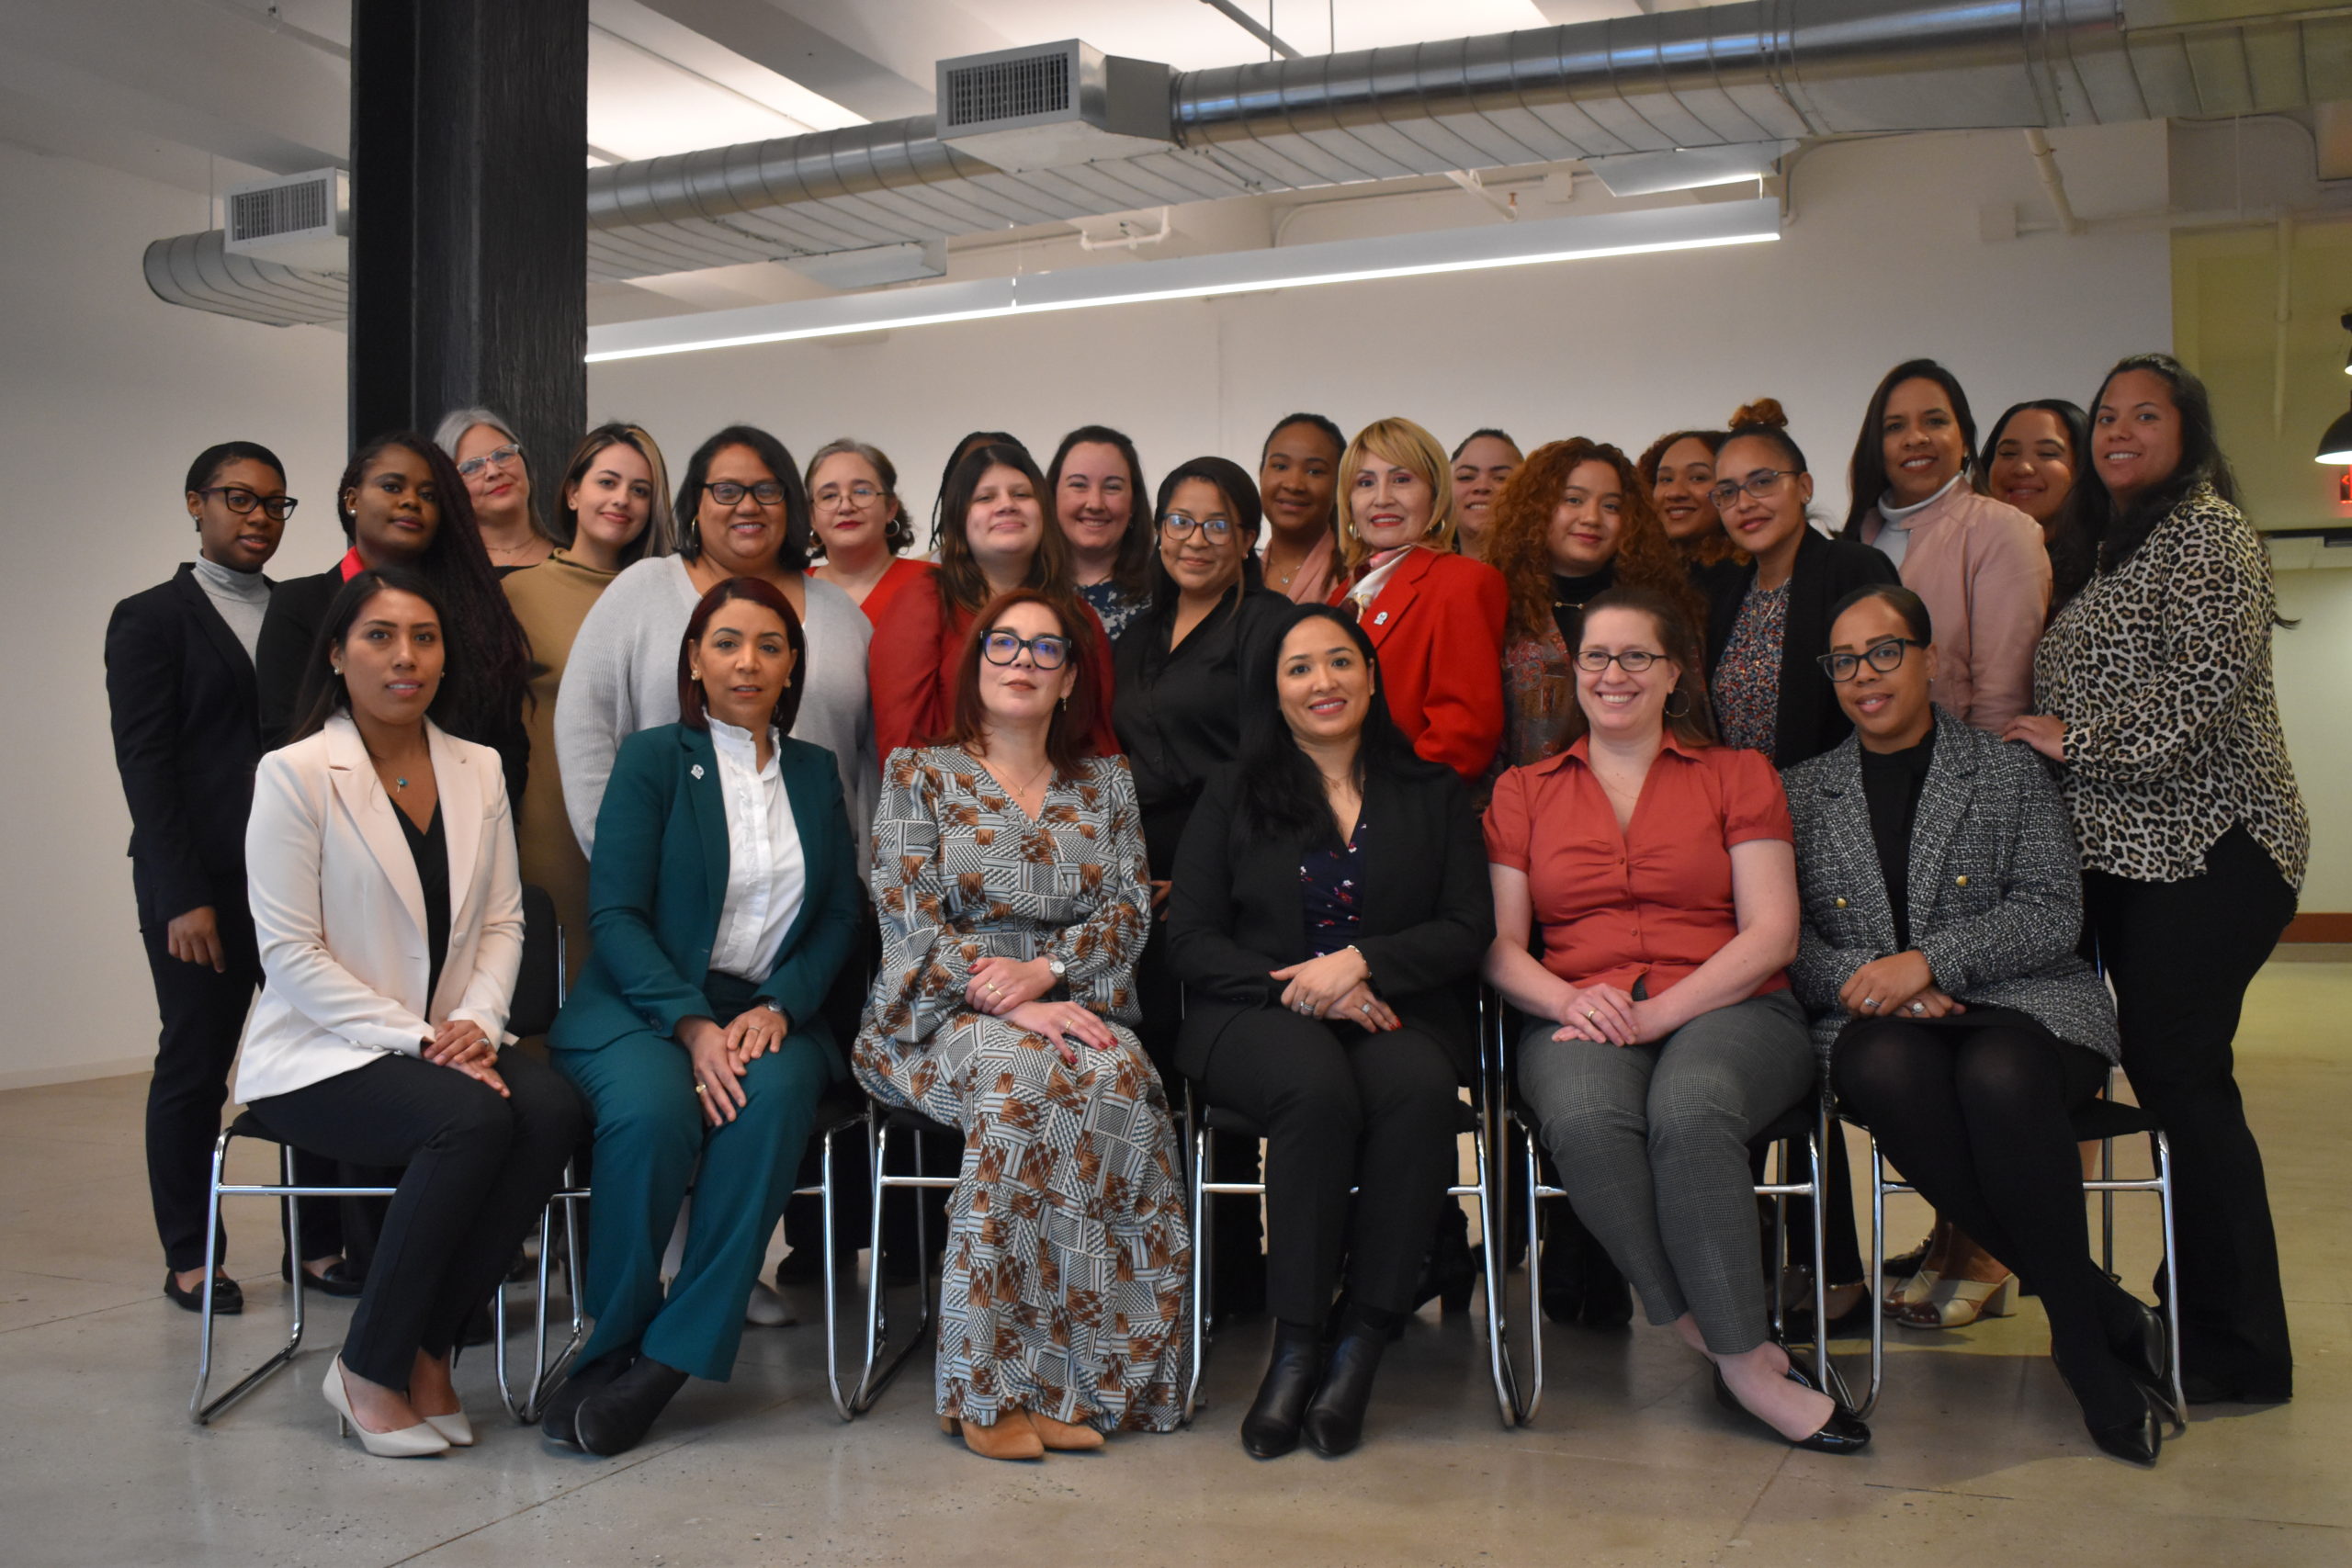 CHCF Proudly Recognizes its Women of Excellence for Women’s History Month